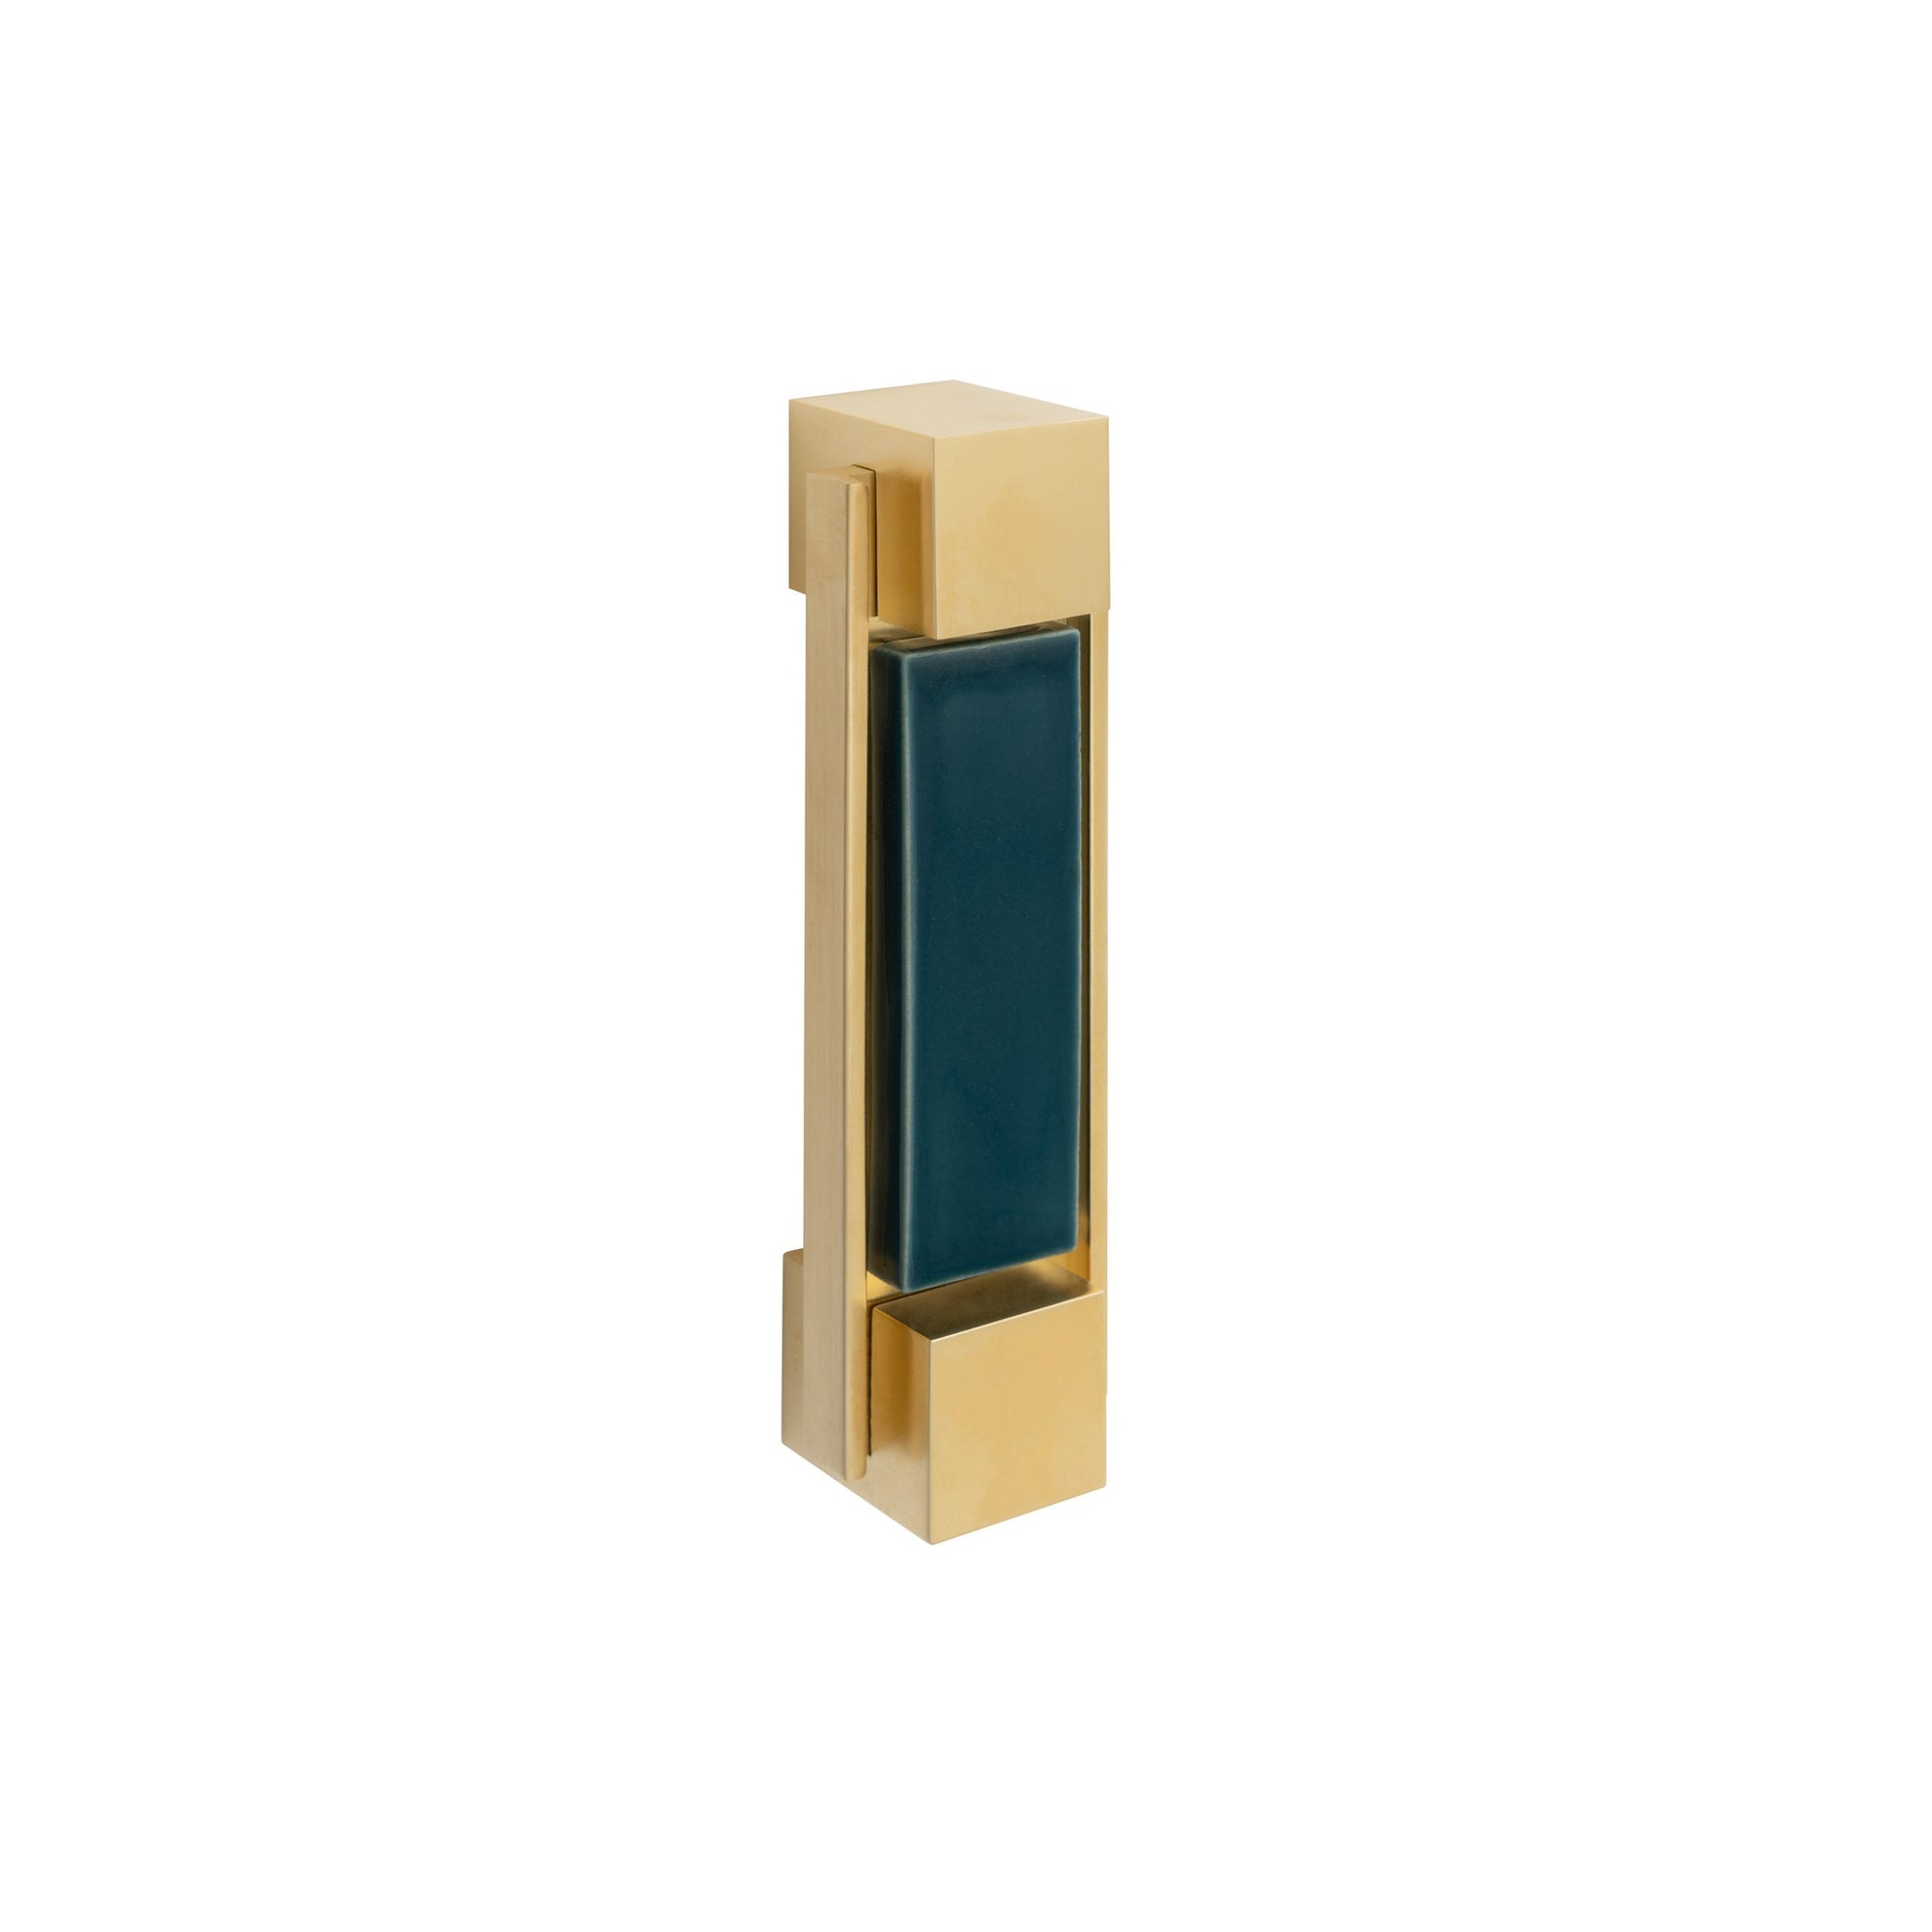 2120-BRPL-GR03-GP Sherle Wagner International The Blue Spruce Insert Apollo Bar Pull in Gold Plate metal finish